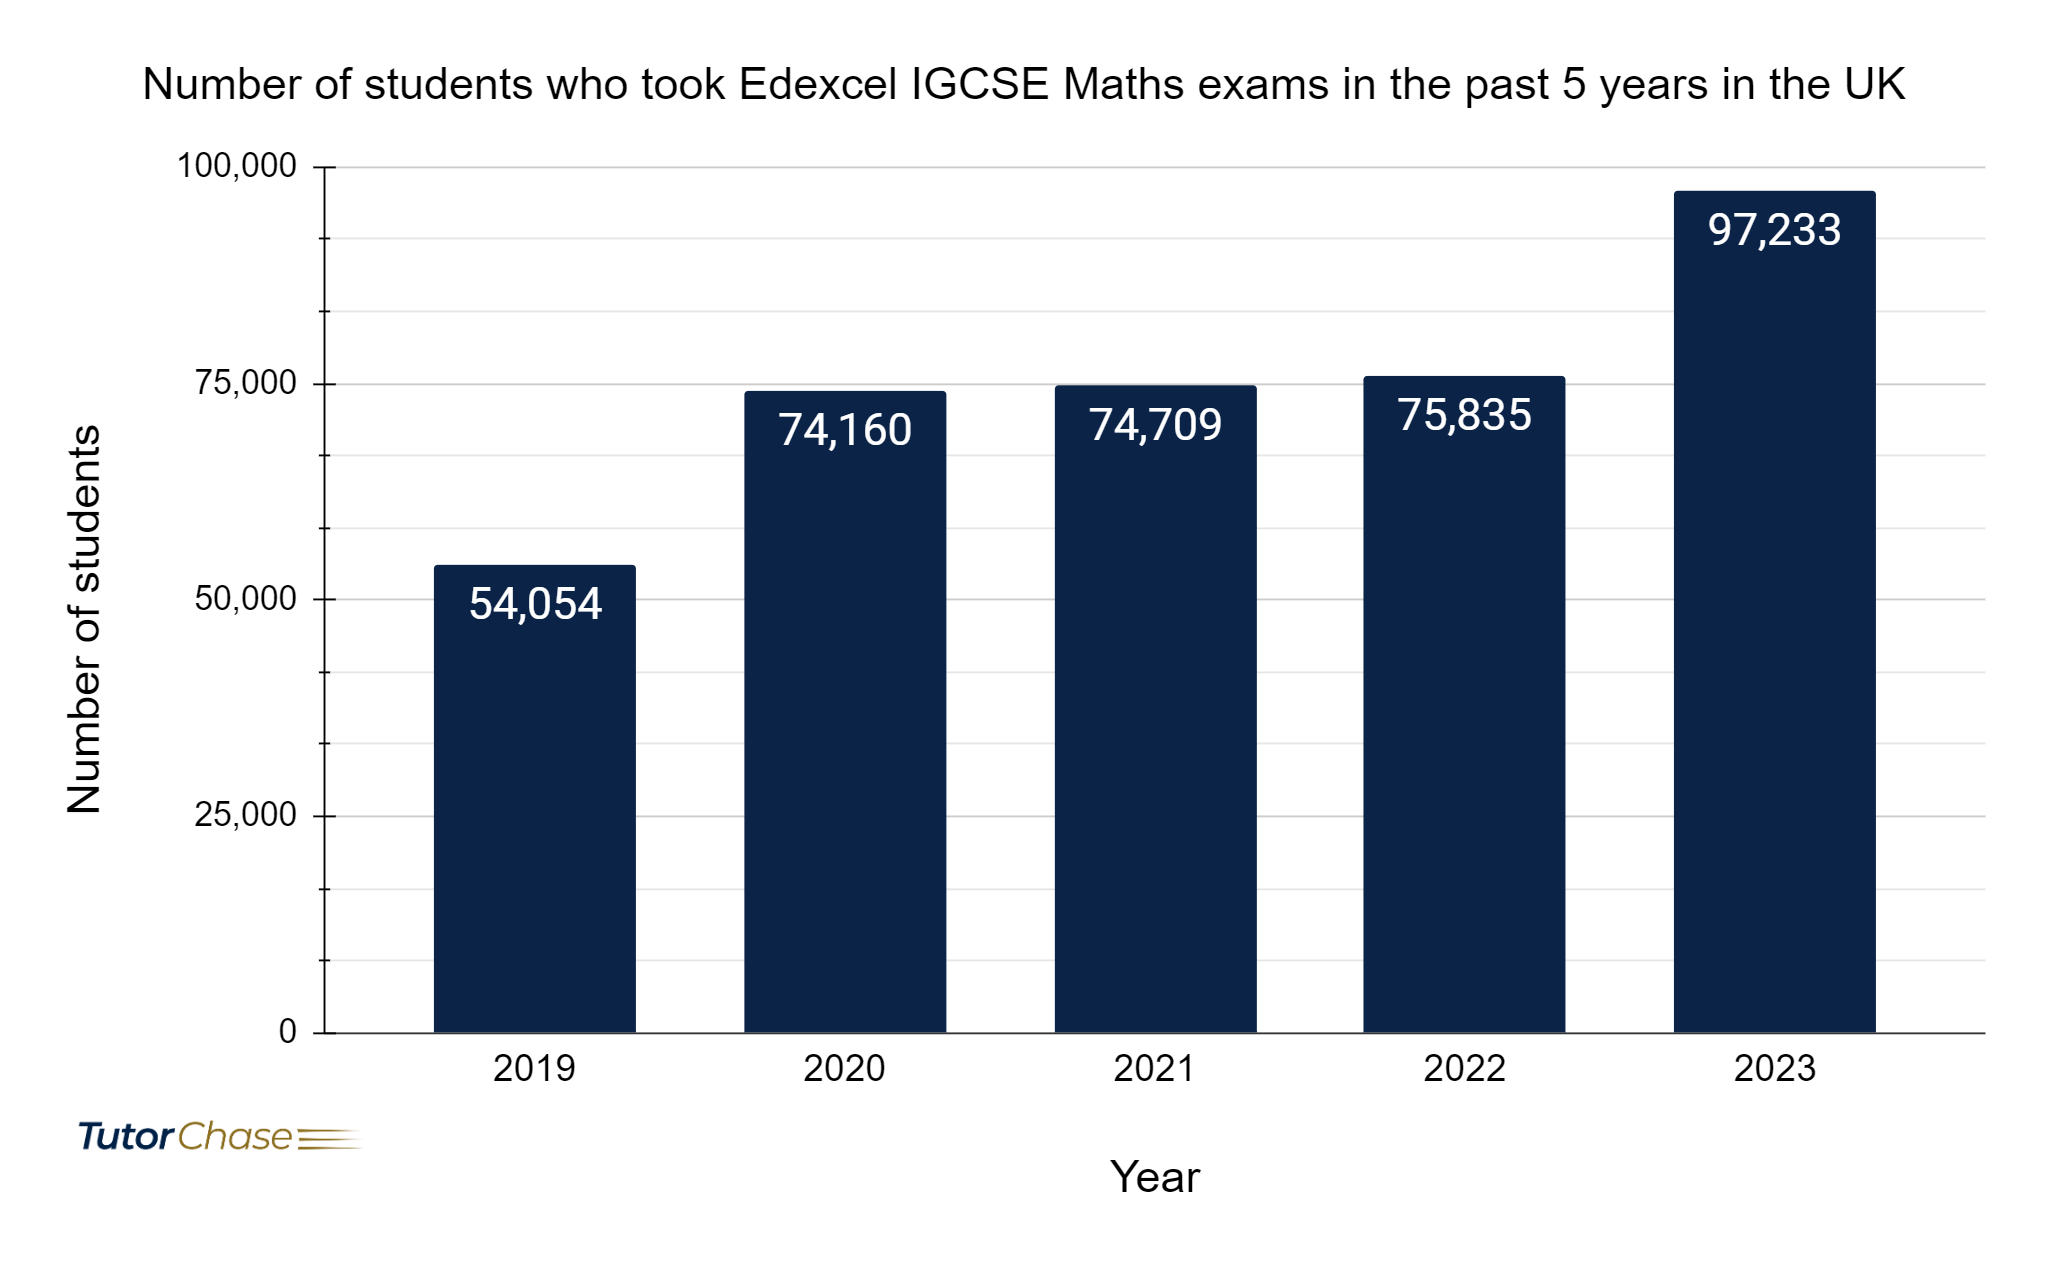 Number of students who took Edexcel IGCSE Maths exams in the past 5 years